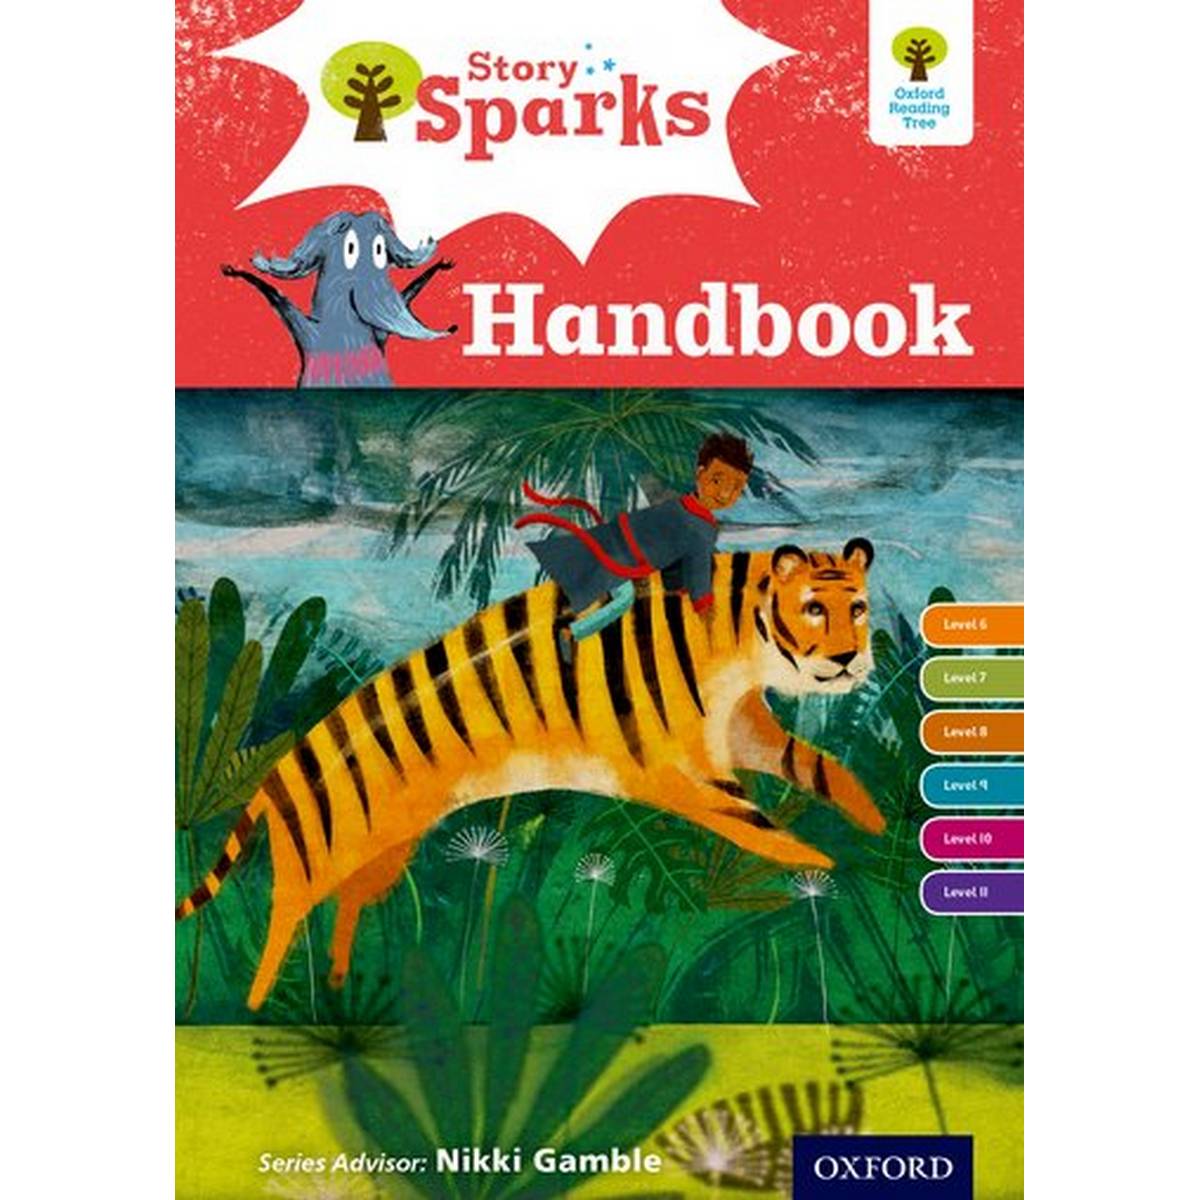 Oxford Reading Tree Story Sparks Levels 6-11 Handbook